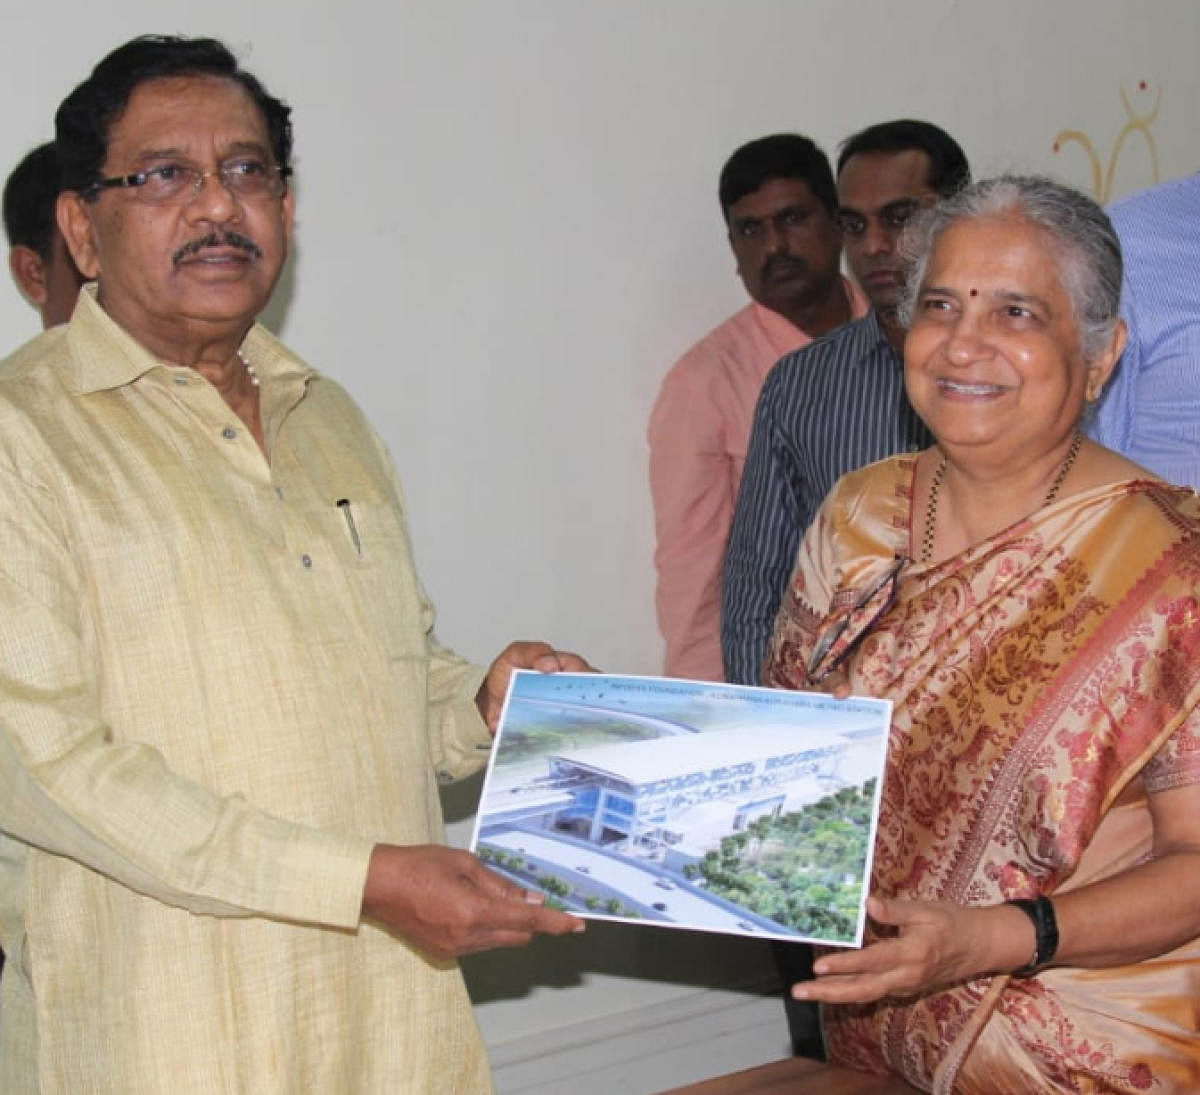 Infosys Foundation chairman Sudha Murthy presents a sketch of the upcoming metro station to Deputy Chief Minister G Parameshwara on Monday.